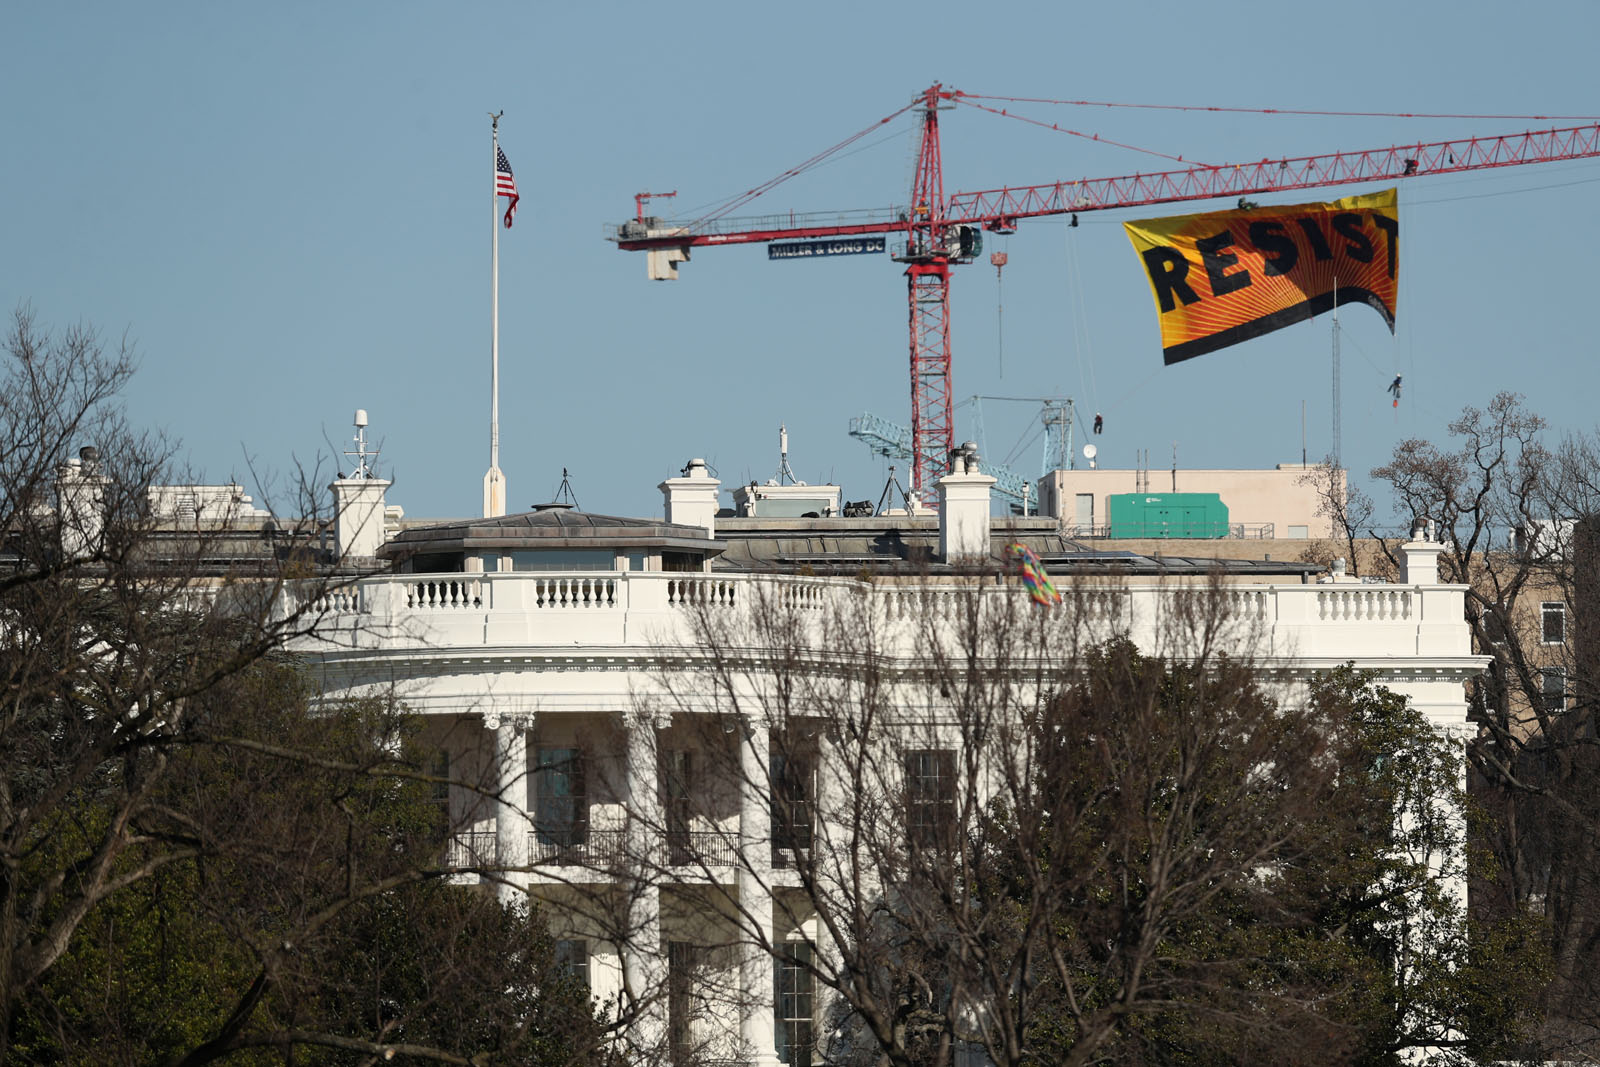 Greenpeace protesters unfurl a banner that reads "Resist" at the construction site of the former Washington Post building, near the White House in Washington, Wednesday, Jan. 25, 2017, after police say protesters climbed a crane at the site refusing to allow workers to work in the area. (AP Photo/Andrew Harnik)